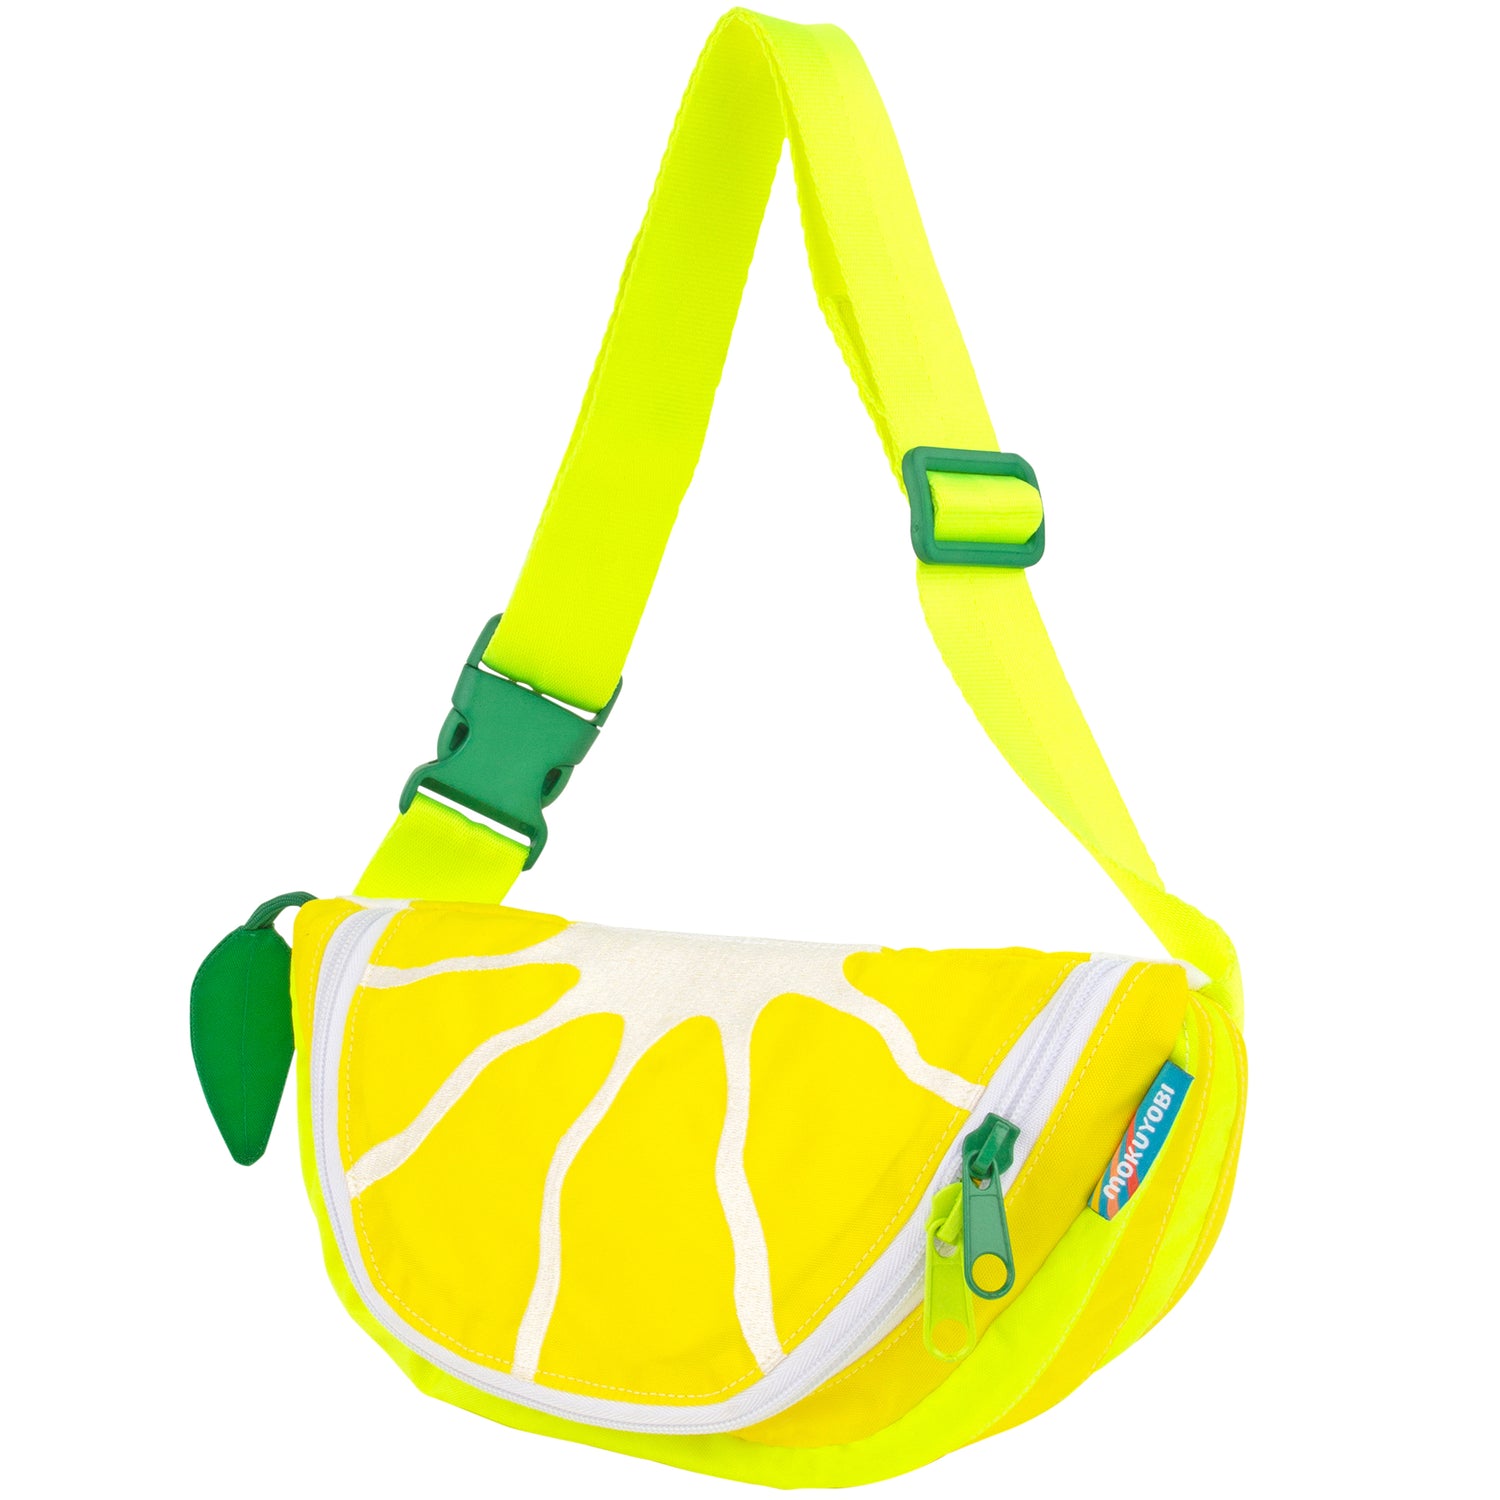 Lemon fruit design fanny pack sling in yellow and green colors.